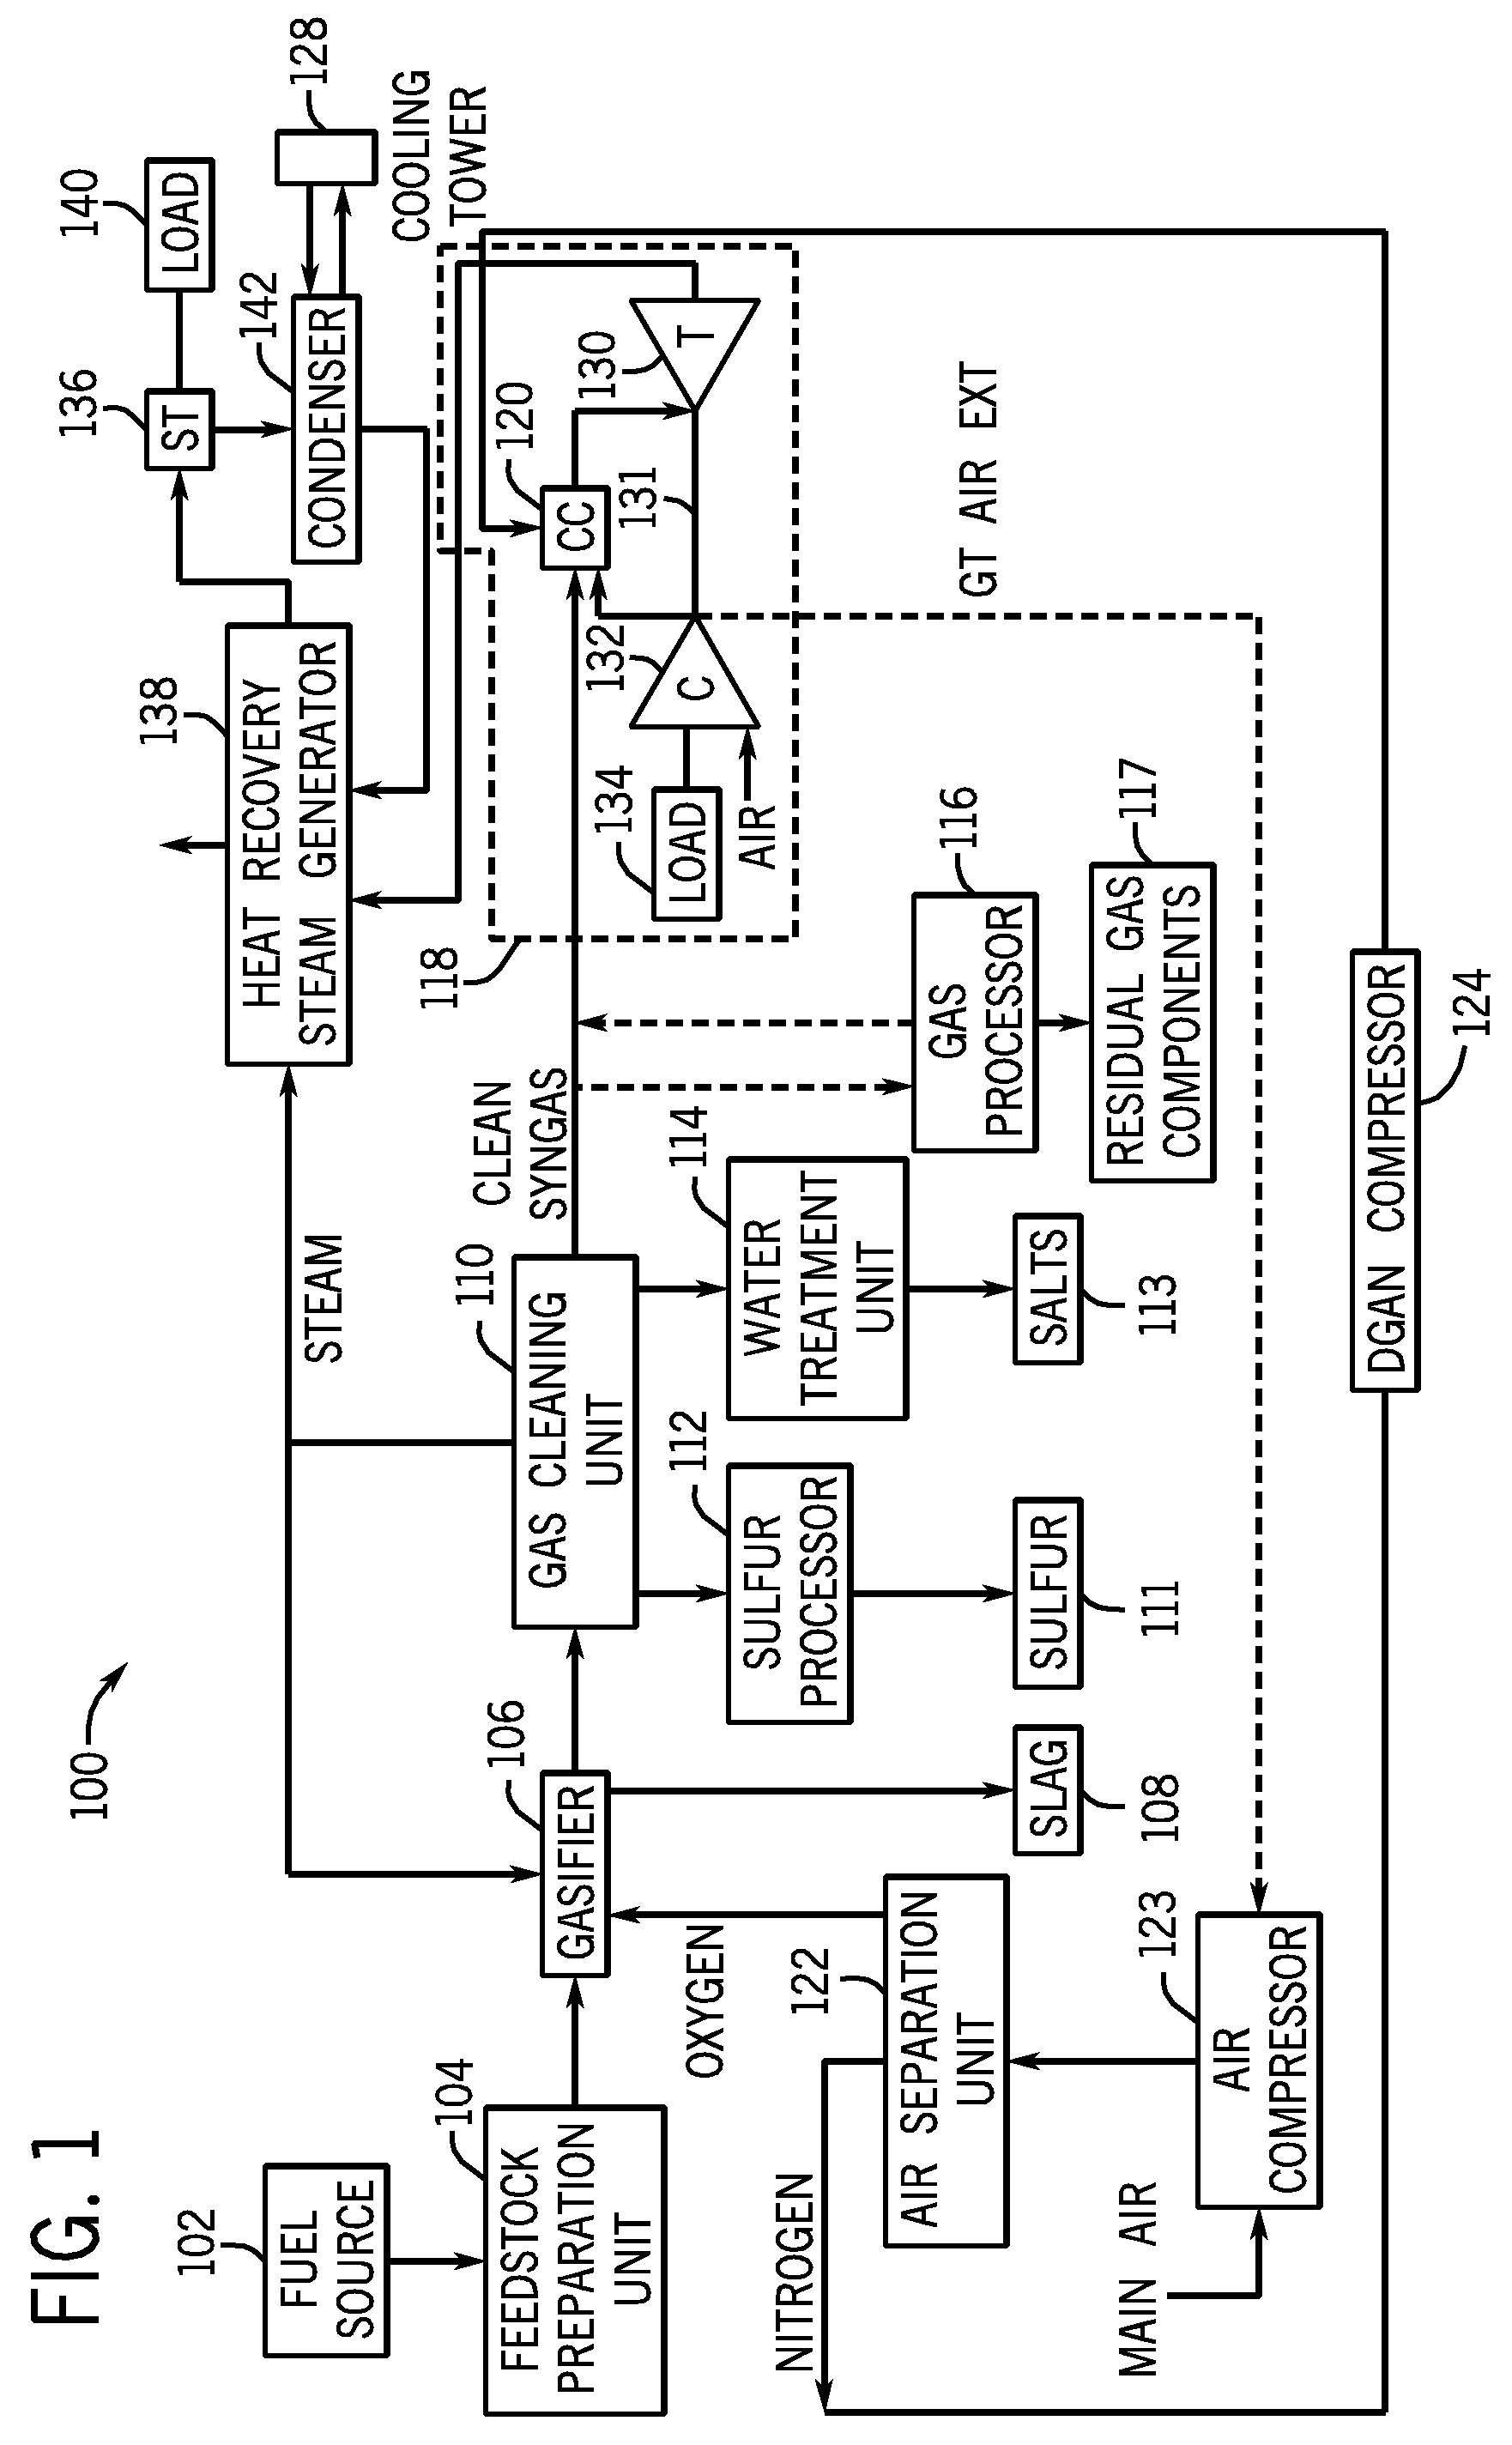 Method and Apparatus for Shielding Cooling Tubes in a Radiant Syngas Cooler